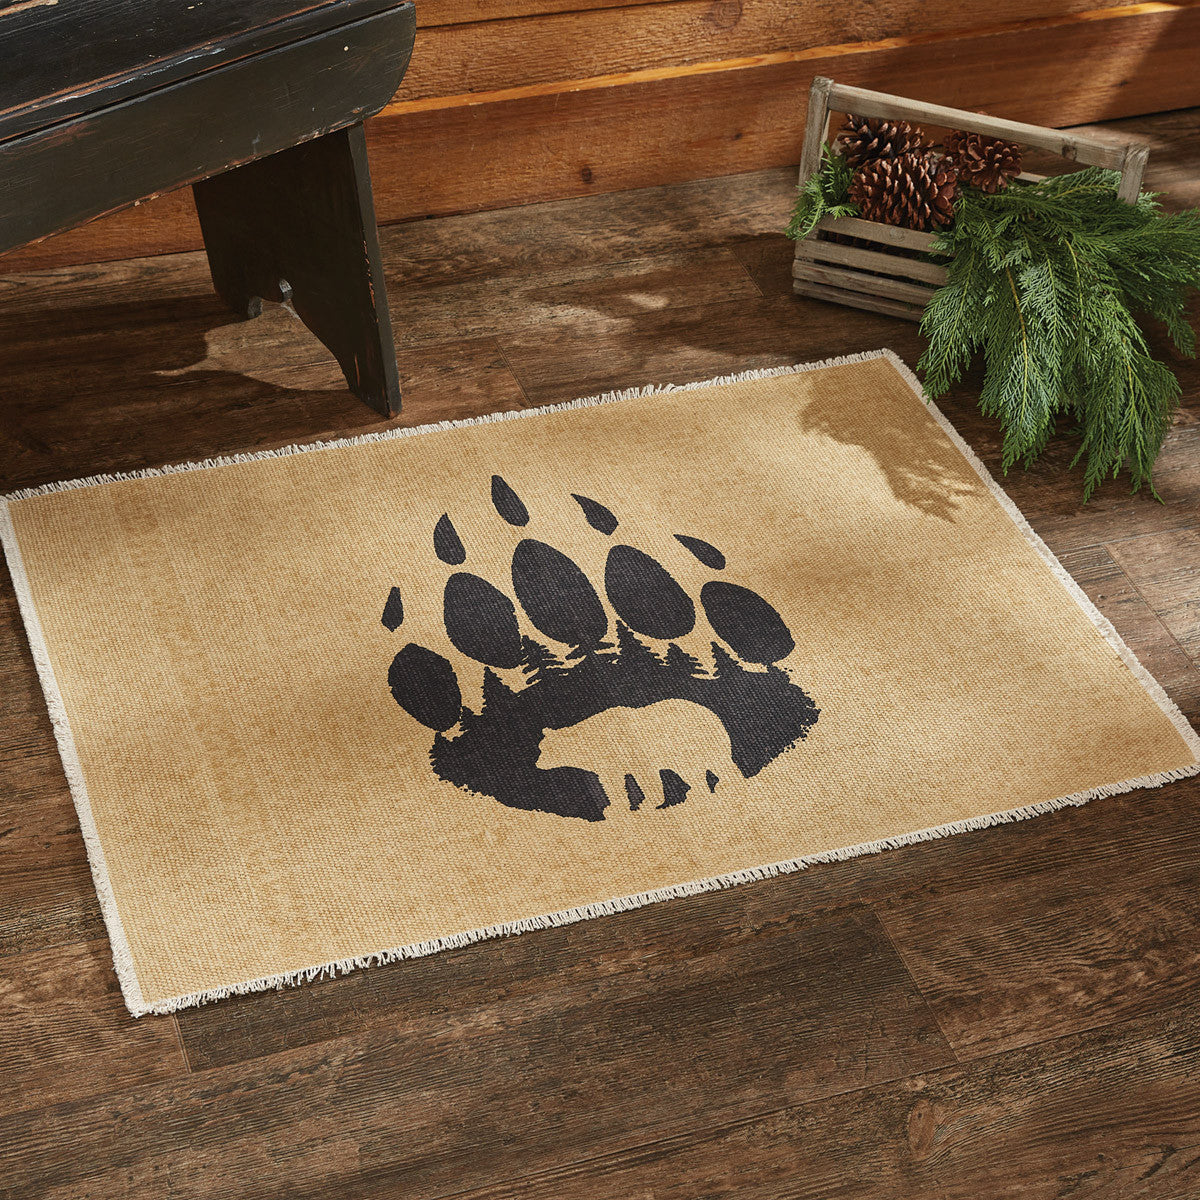 BEAR PAW RUG Large 2' X 3' by Park Designs